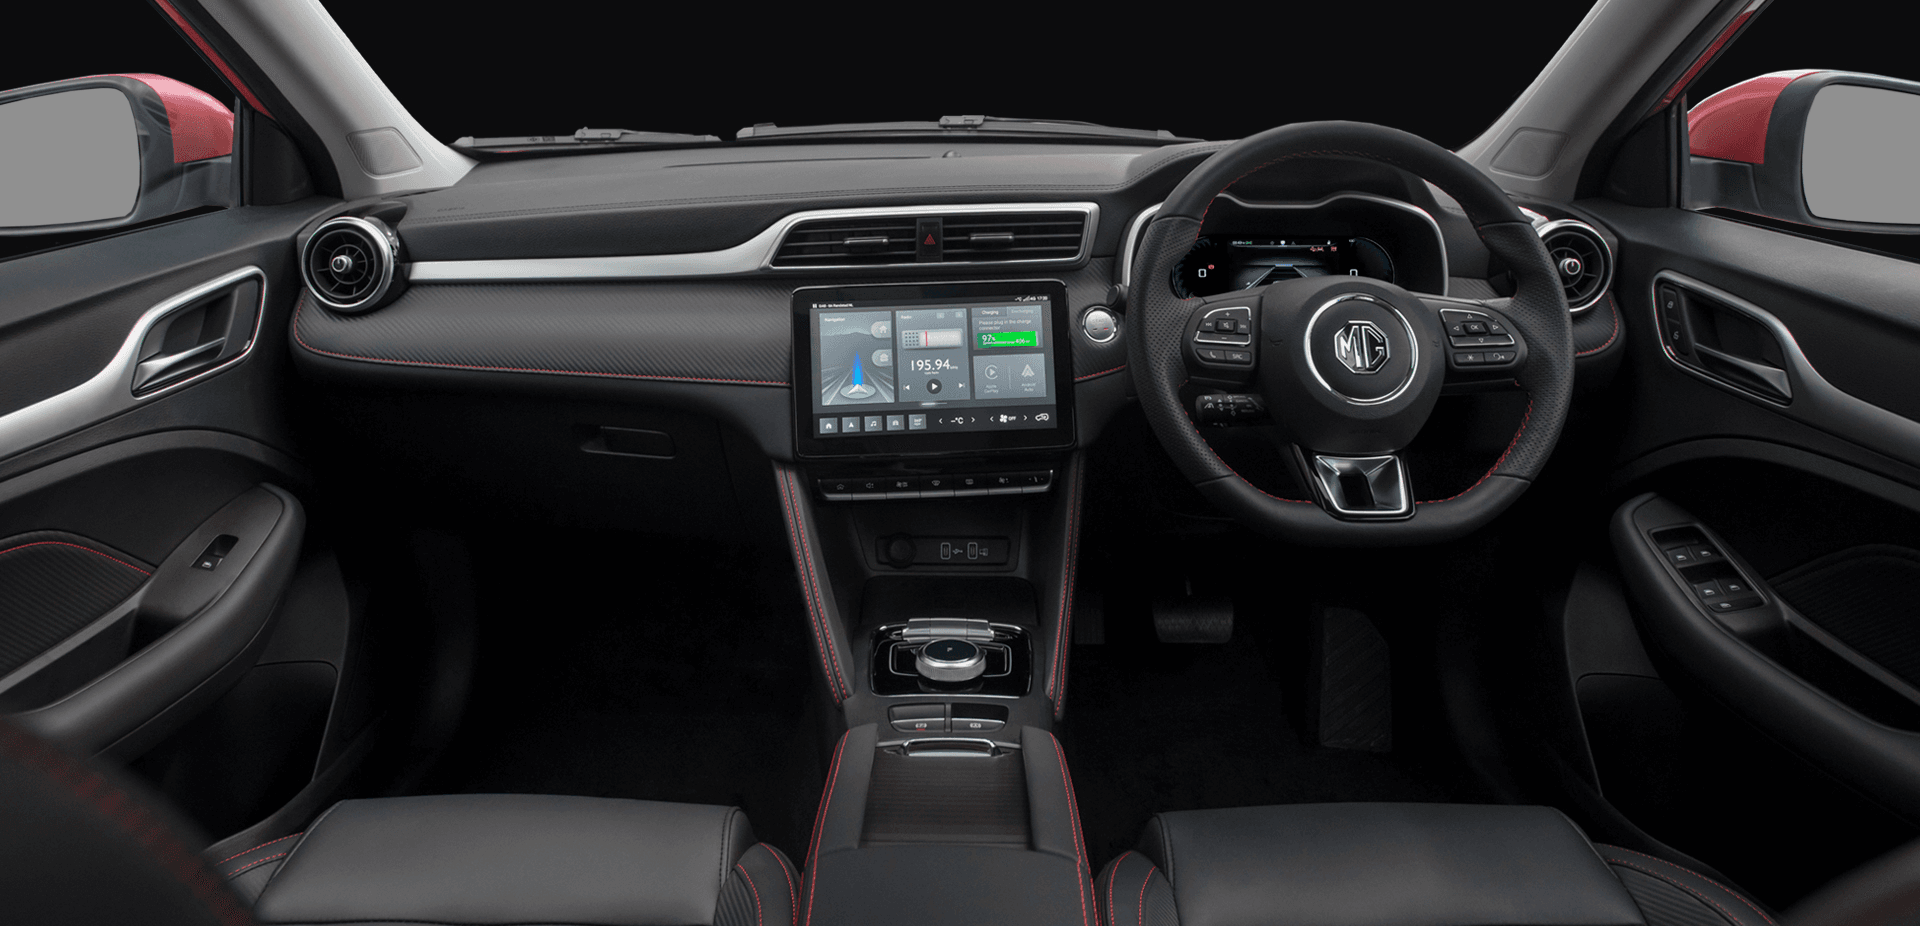 Indulge in comfort with the sophisticated interior design of the MG Car